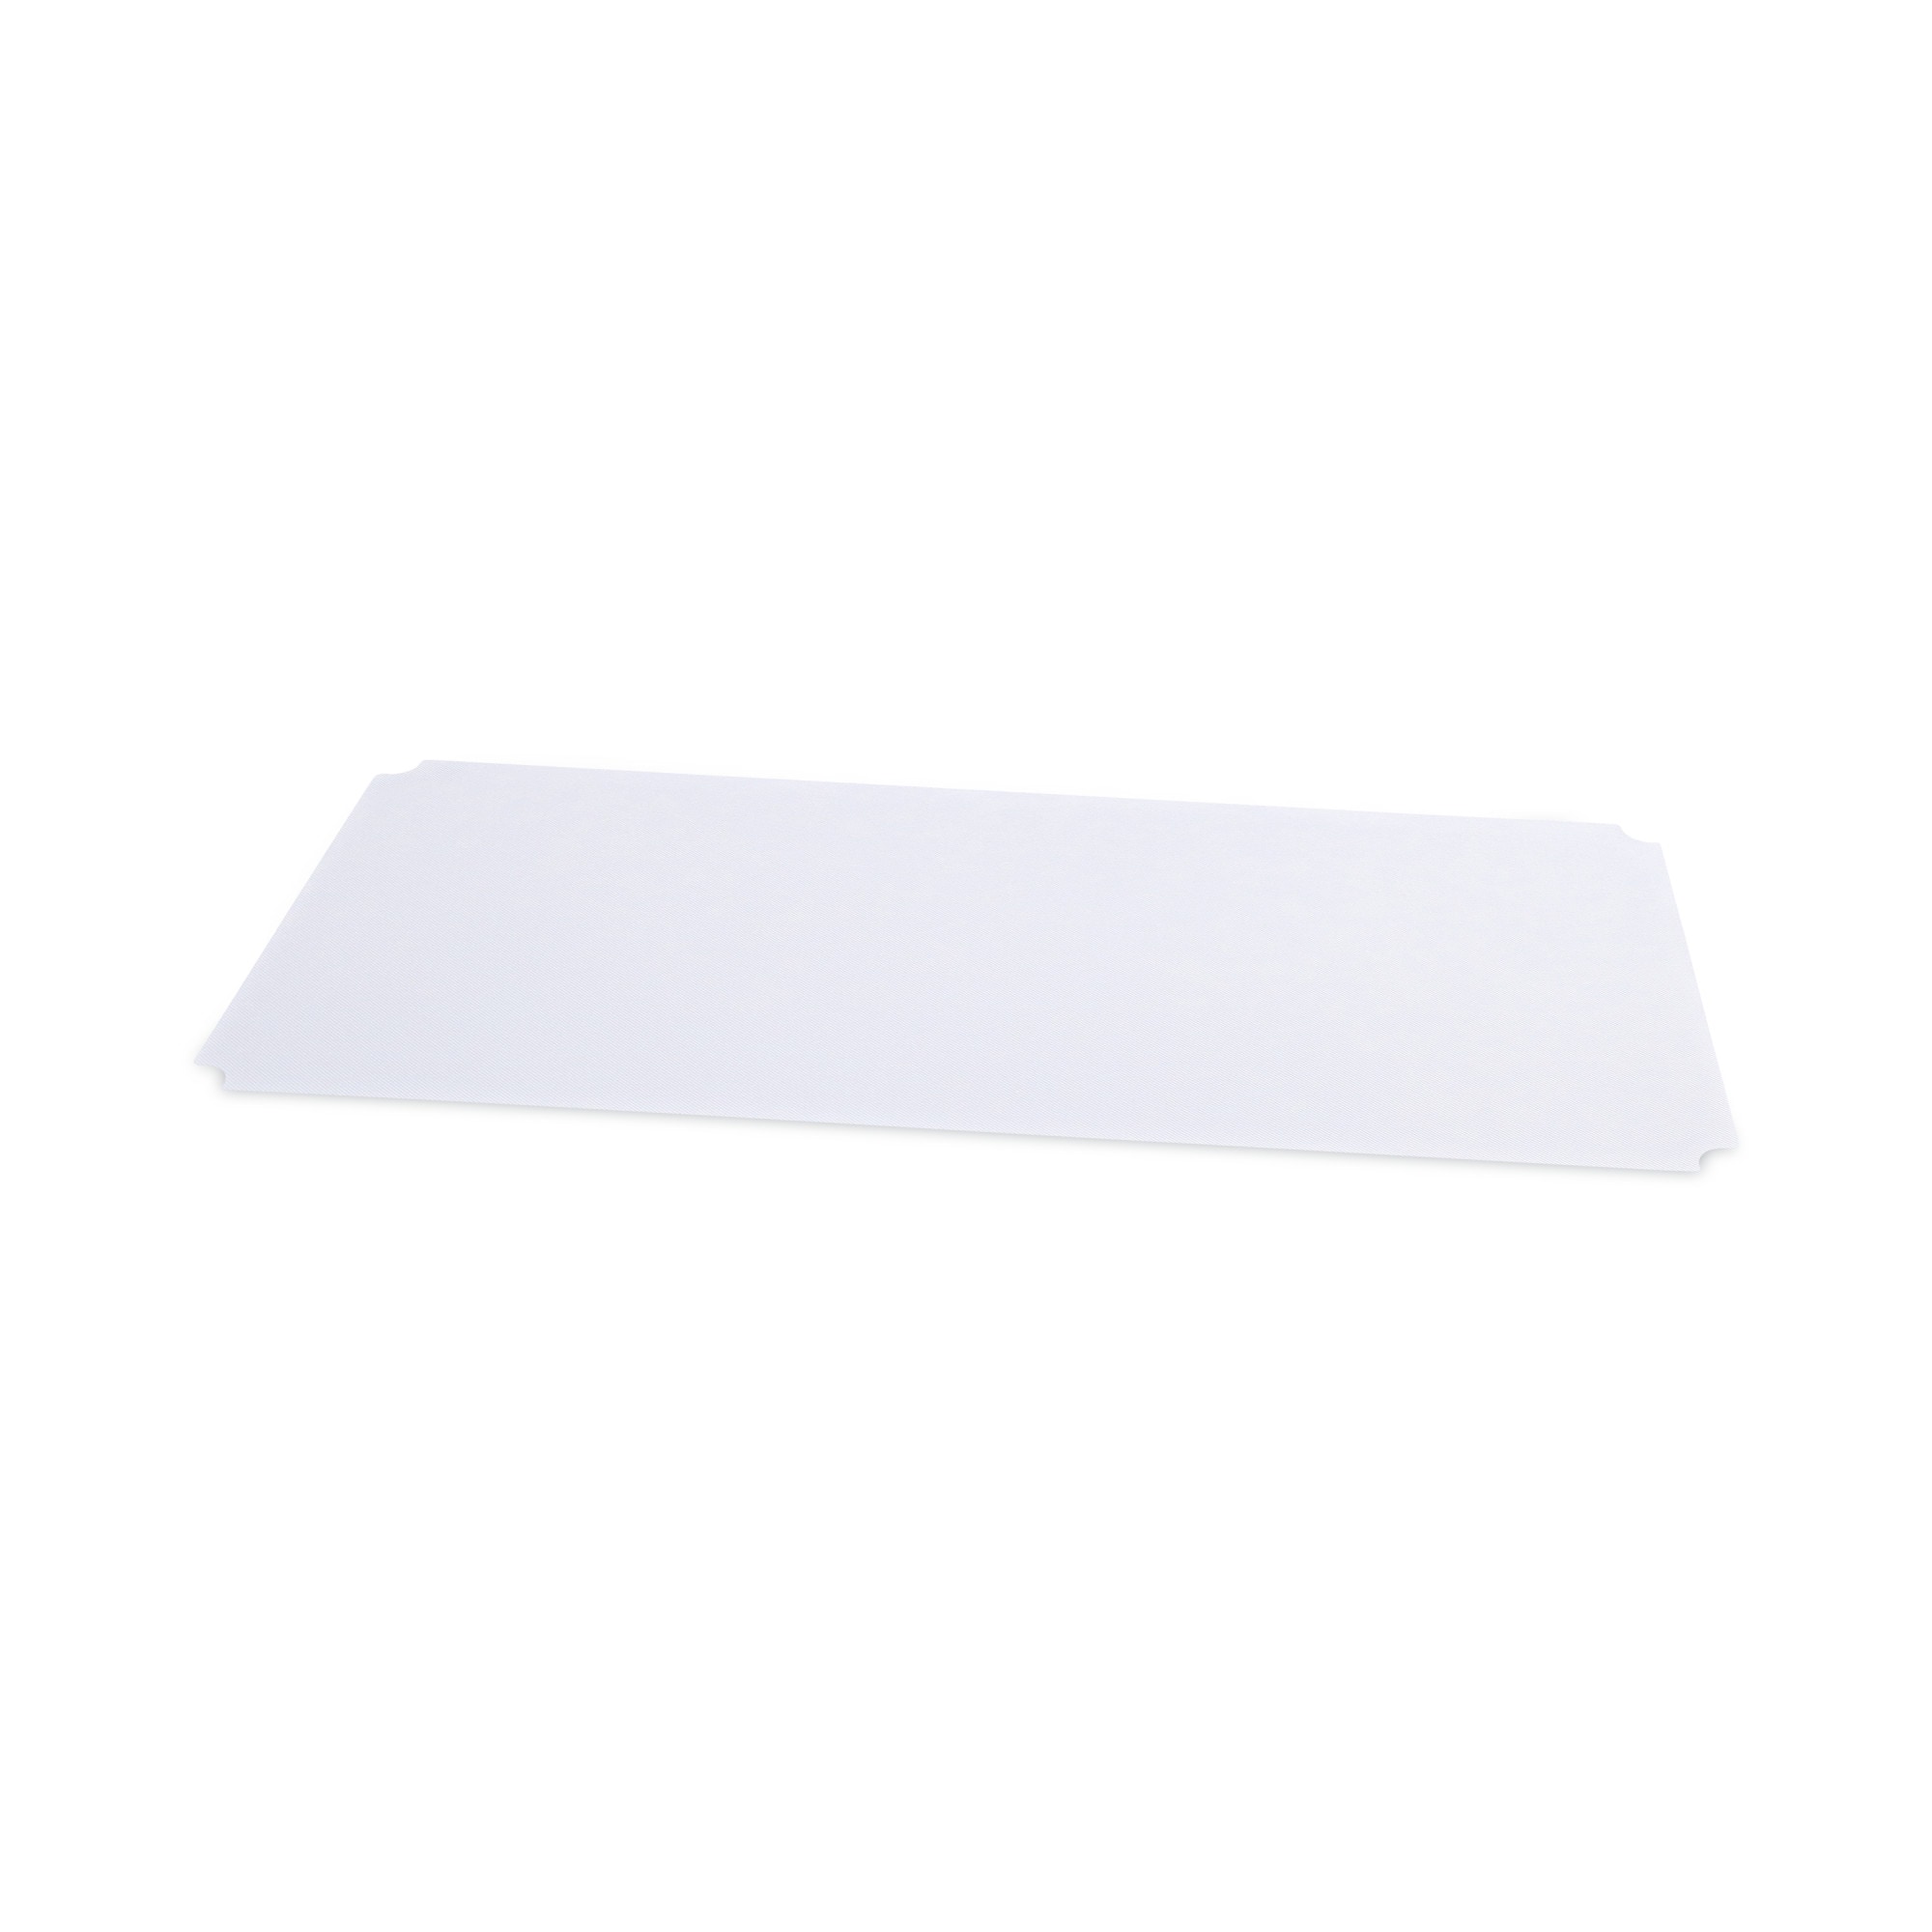 Shelf Liners for Wire Shelf Liner Set of 4 - Frosted Clear (18-Inch-by-48-Inch)